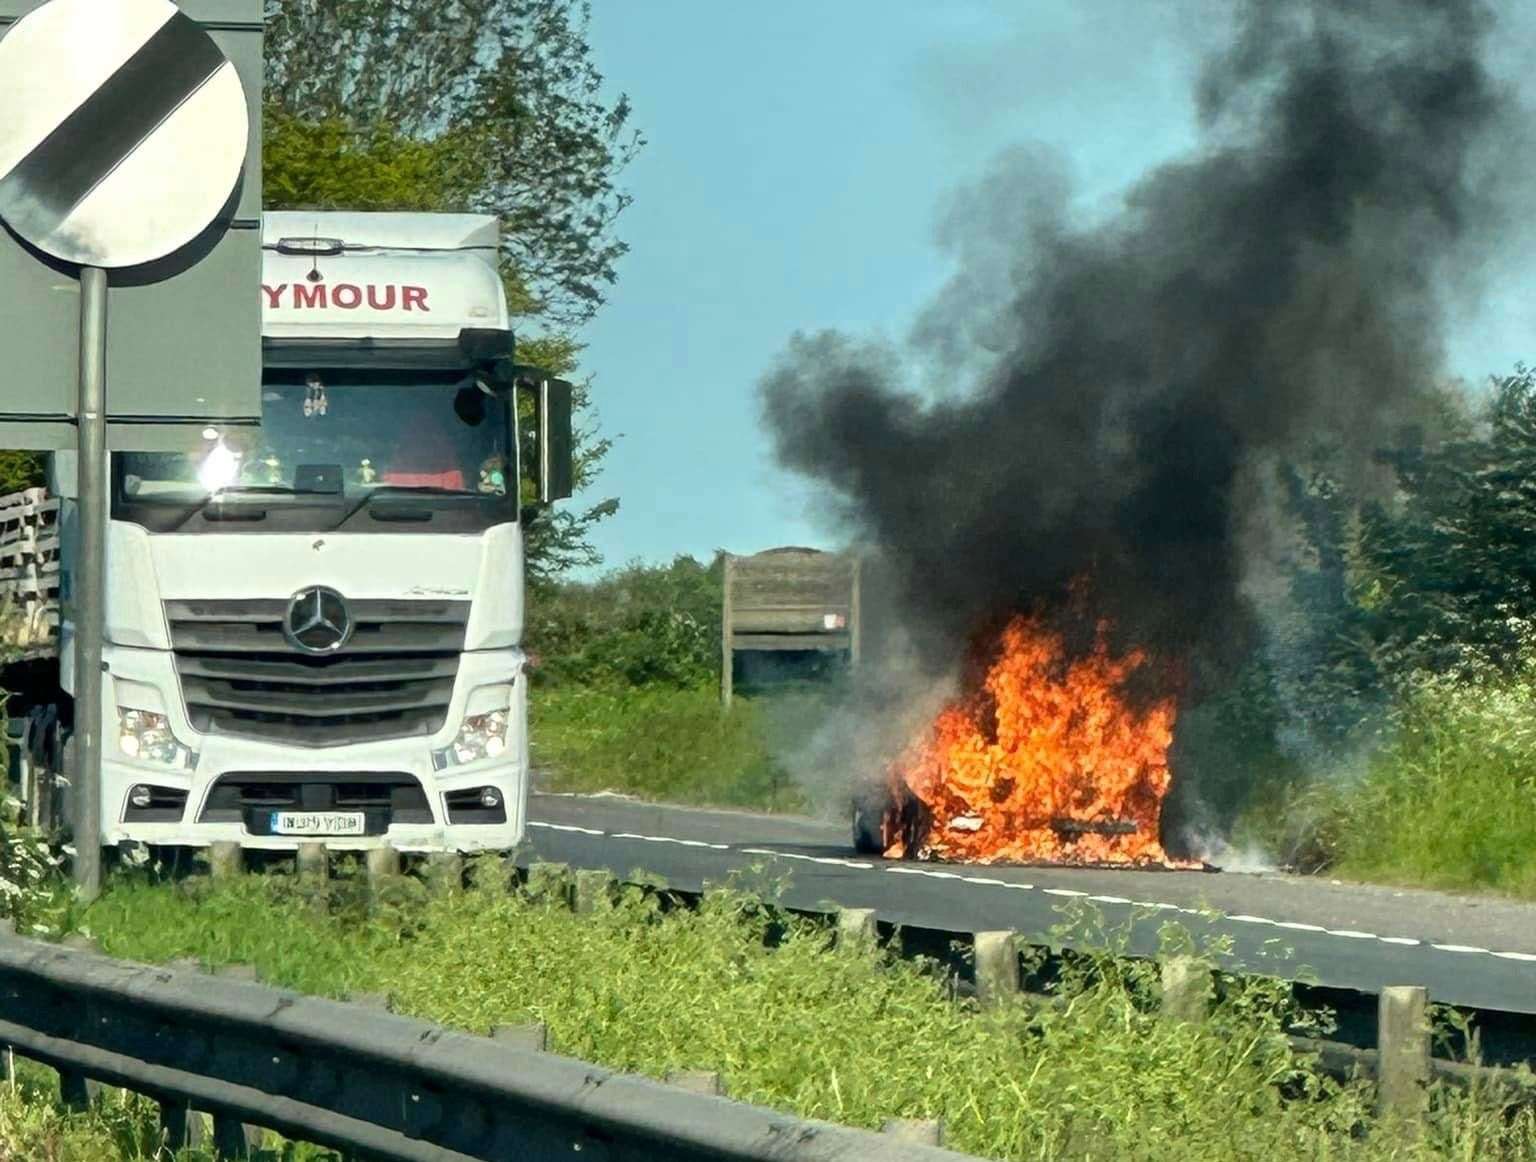 Drivers spotted a car on fire along the A249. Picture: Nikki Dodd